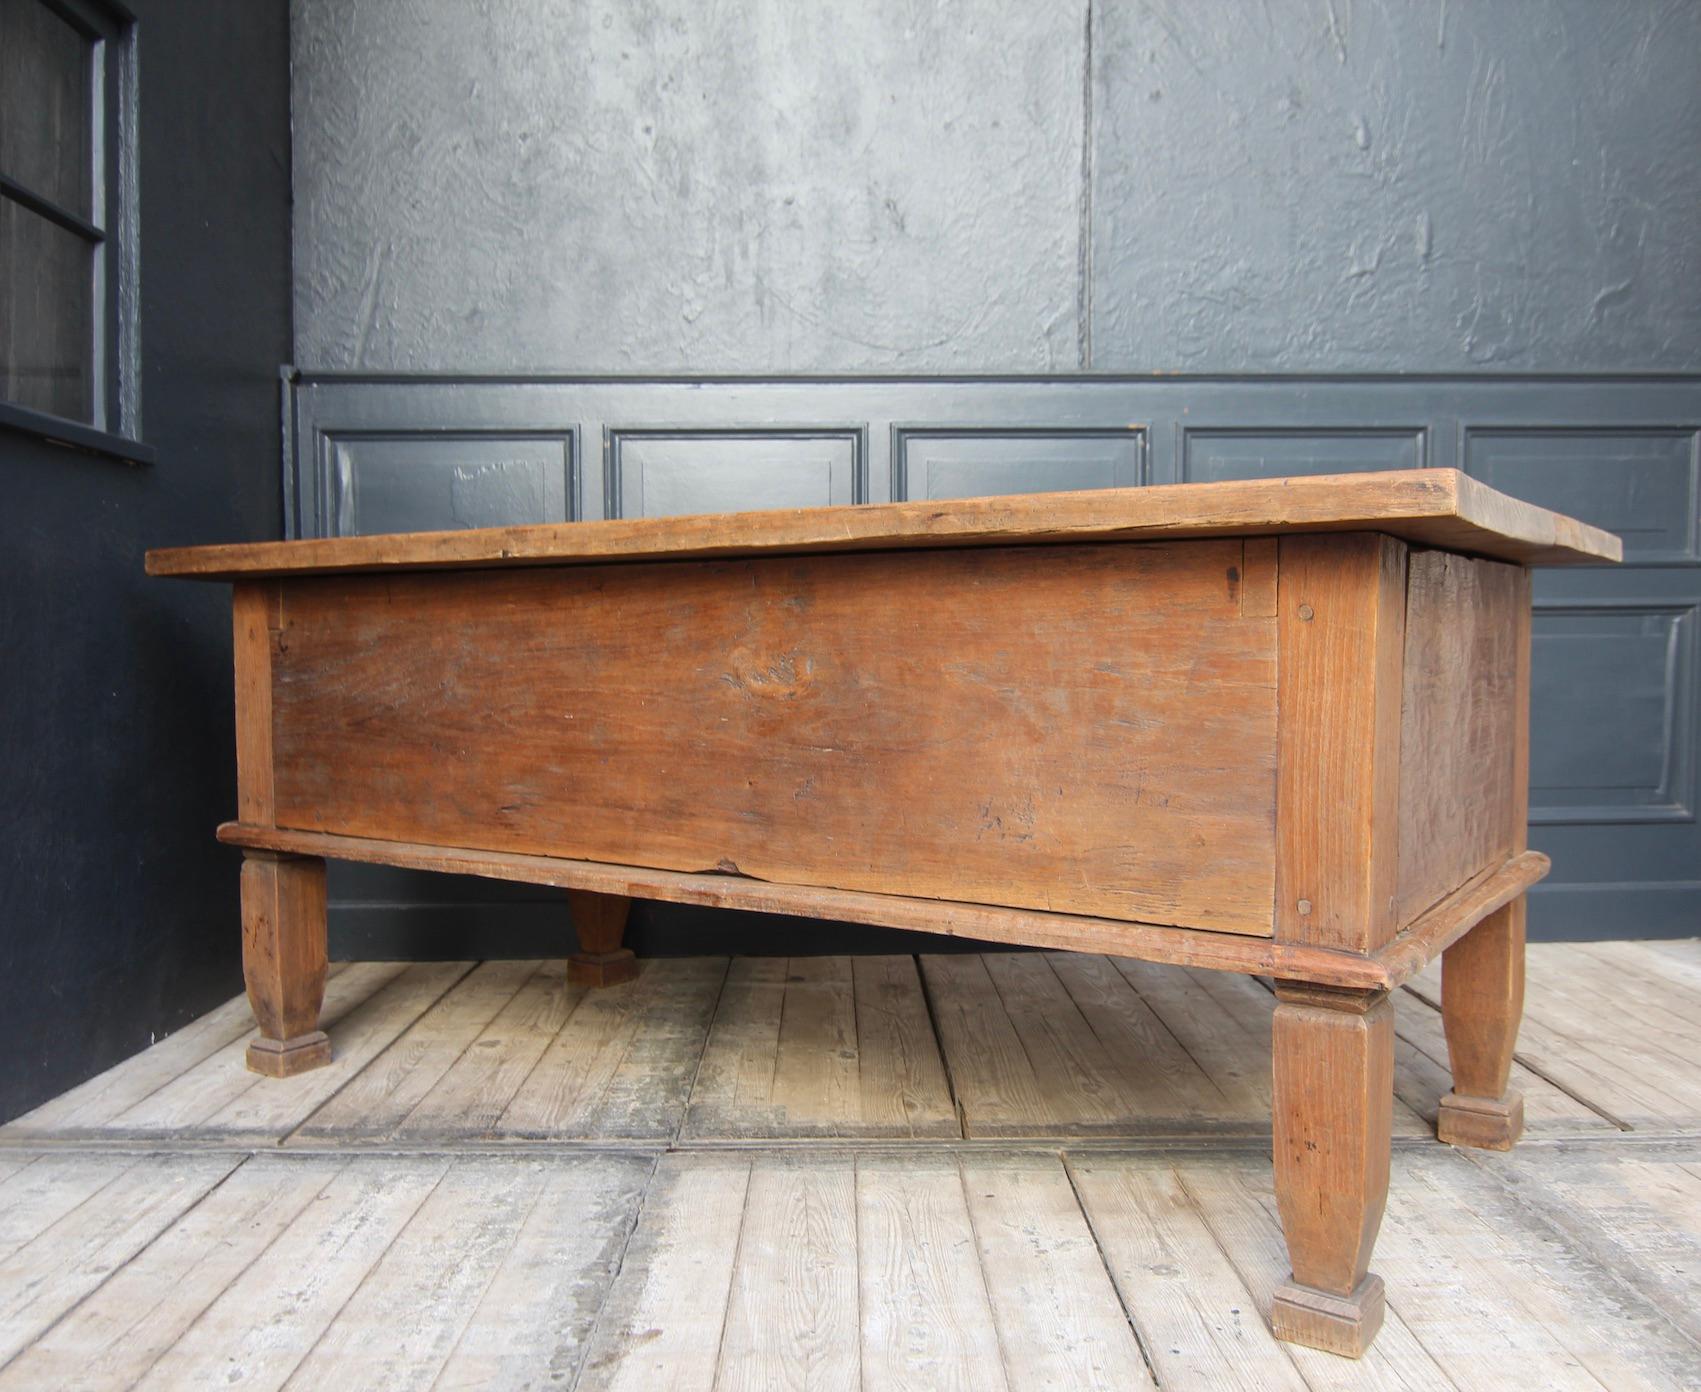 European Early 19th Century Rustic Kitchen Prep Table or Kitchen Island